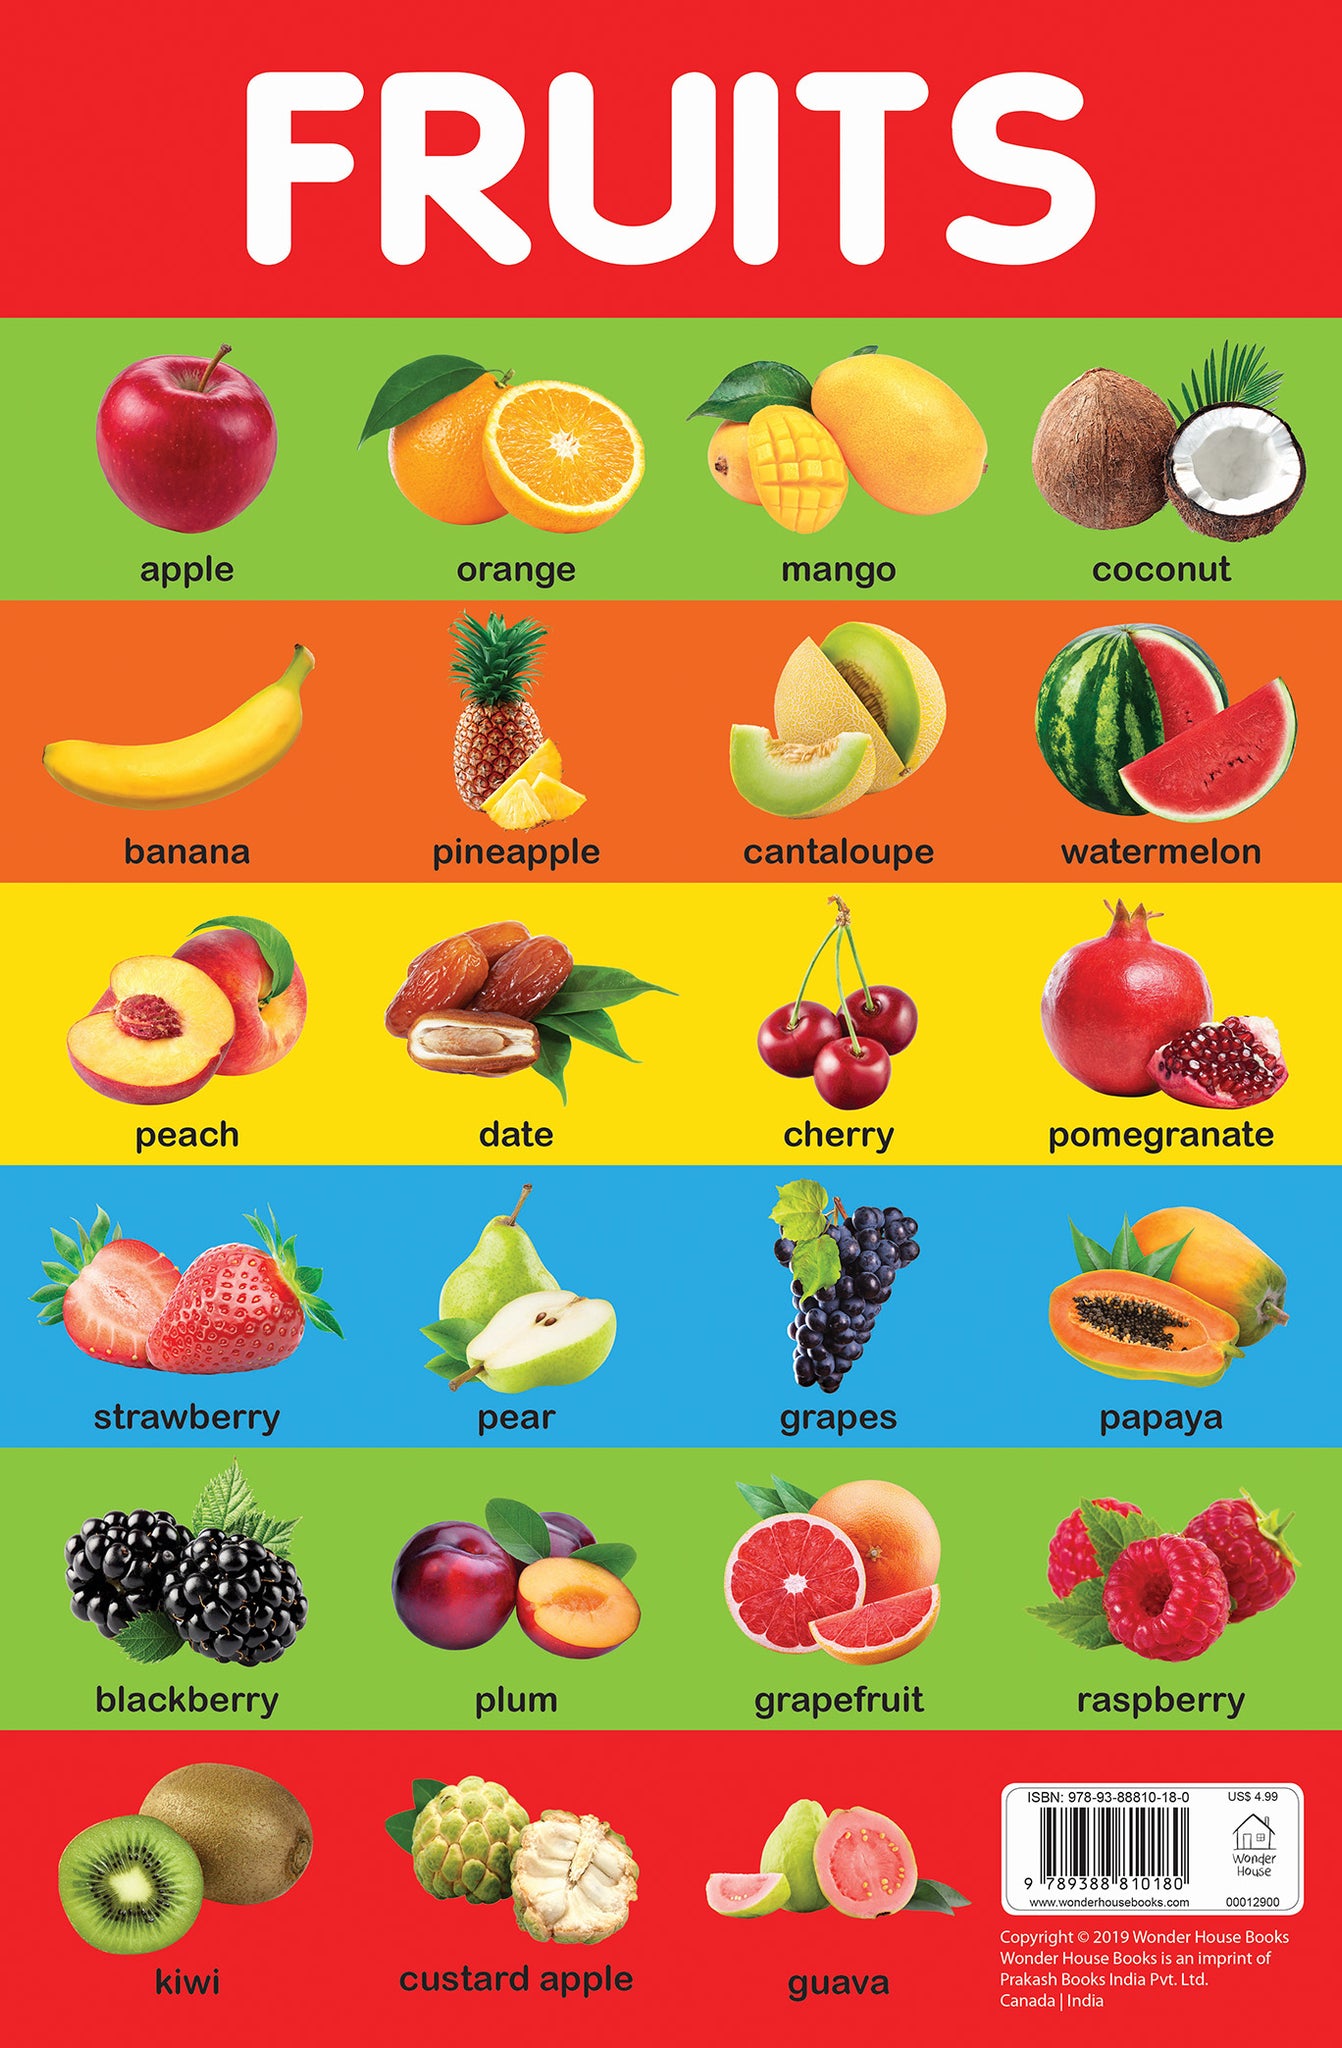 Fruits - Early Learning Educational Posters For Children: Perfect For Kindergarten, Nursery and Homeschooling (19 Inches X 29 Inches)